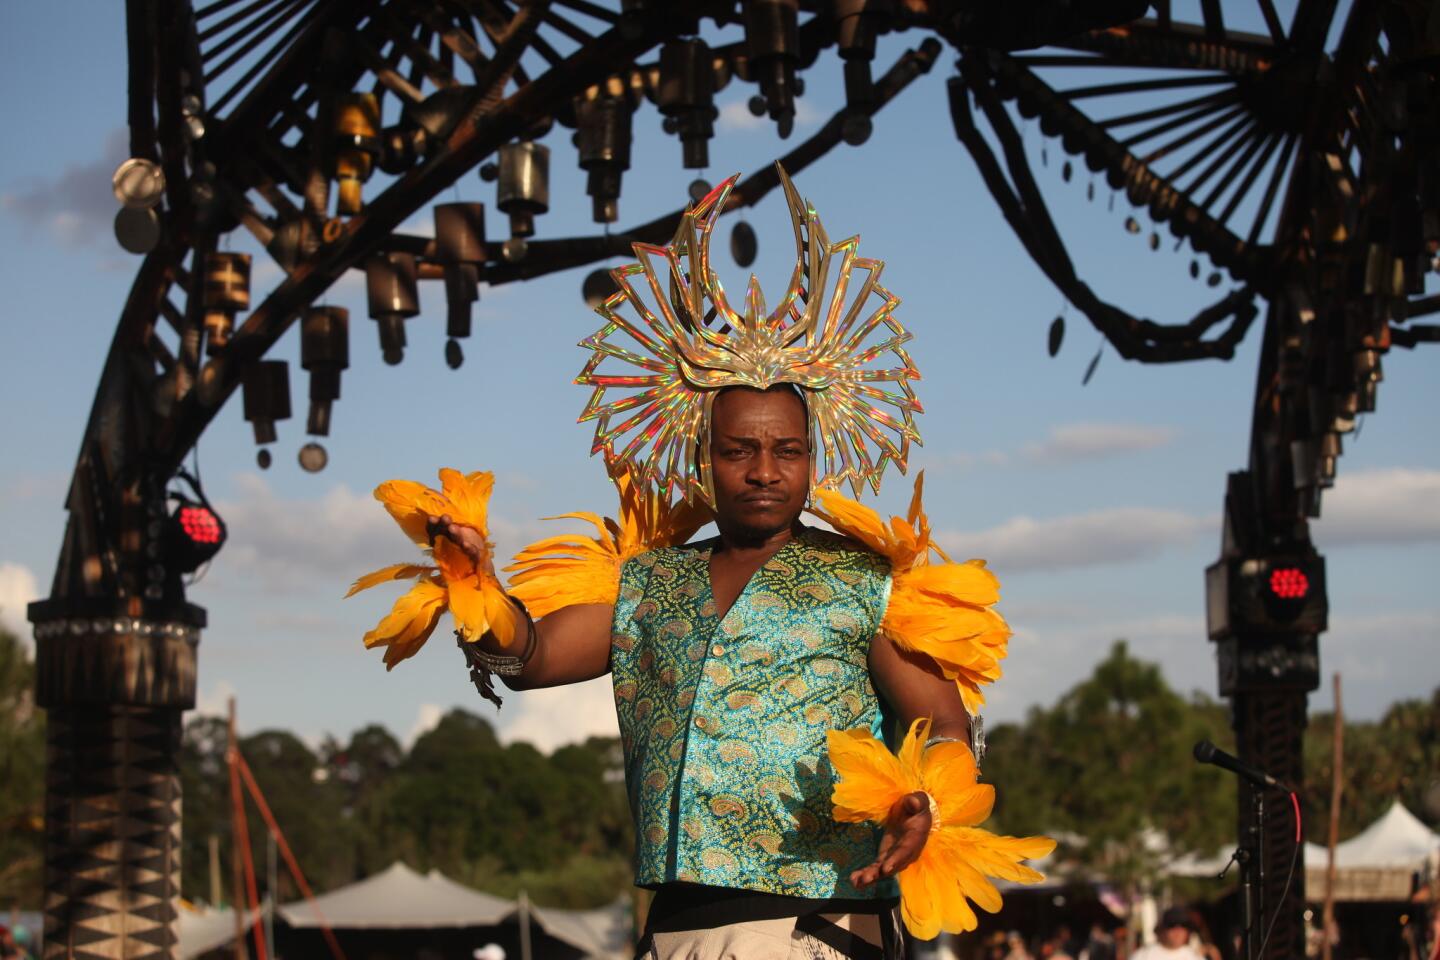 Hip-hop performer Akim Funk Buddha leads the opening ceremony at the 2017 Okeechobee Music and Arts Festival on March 2.